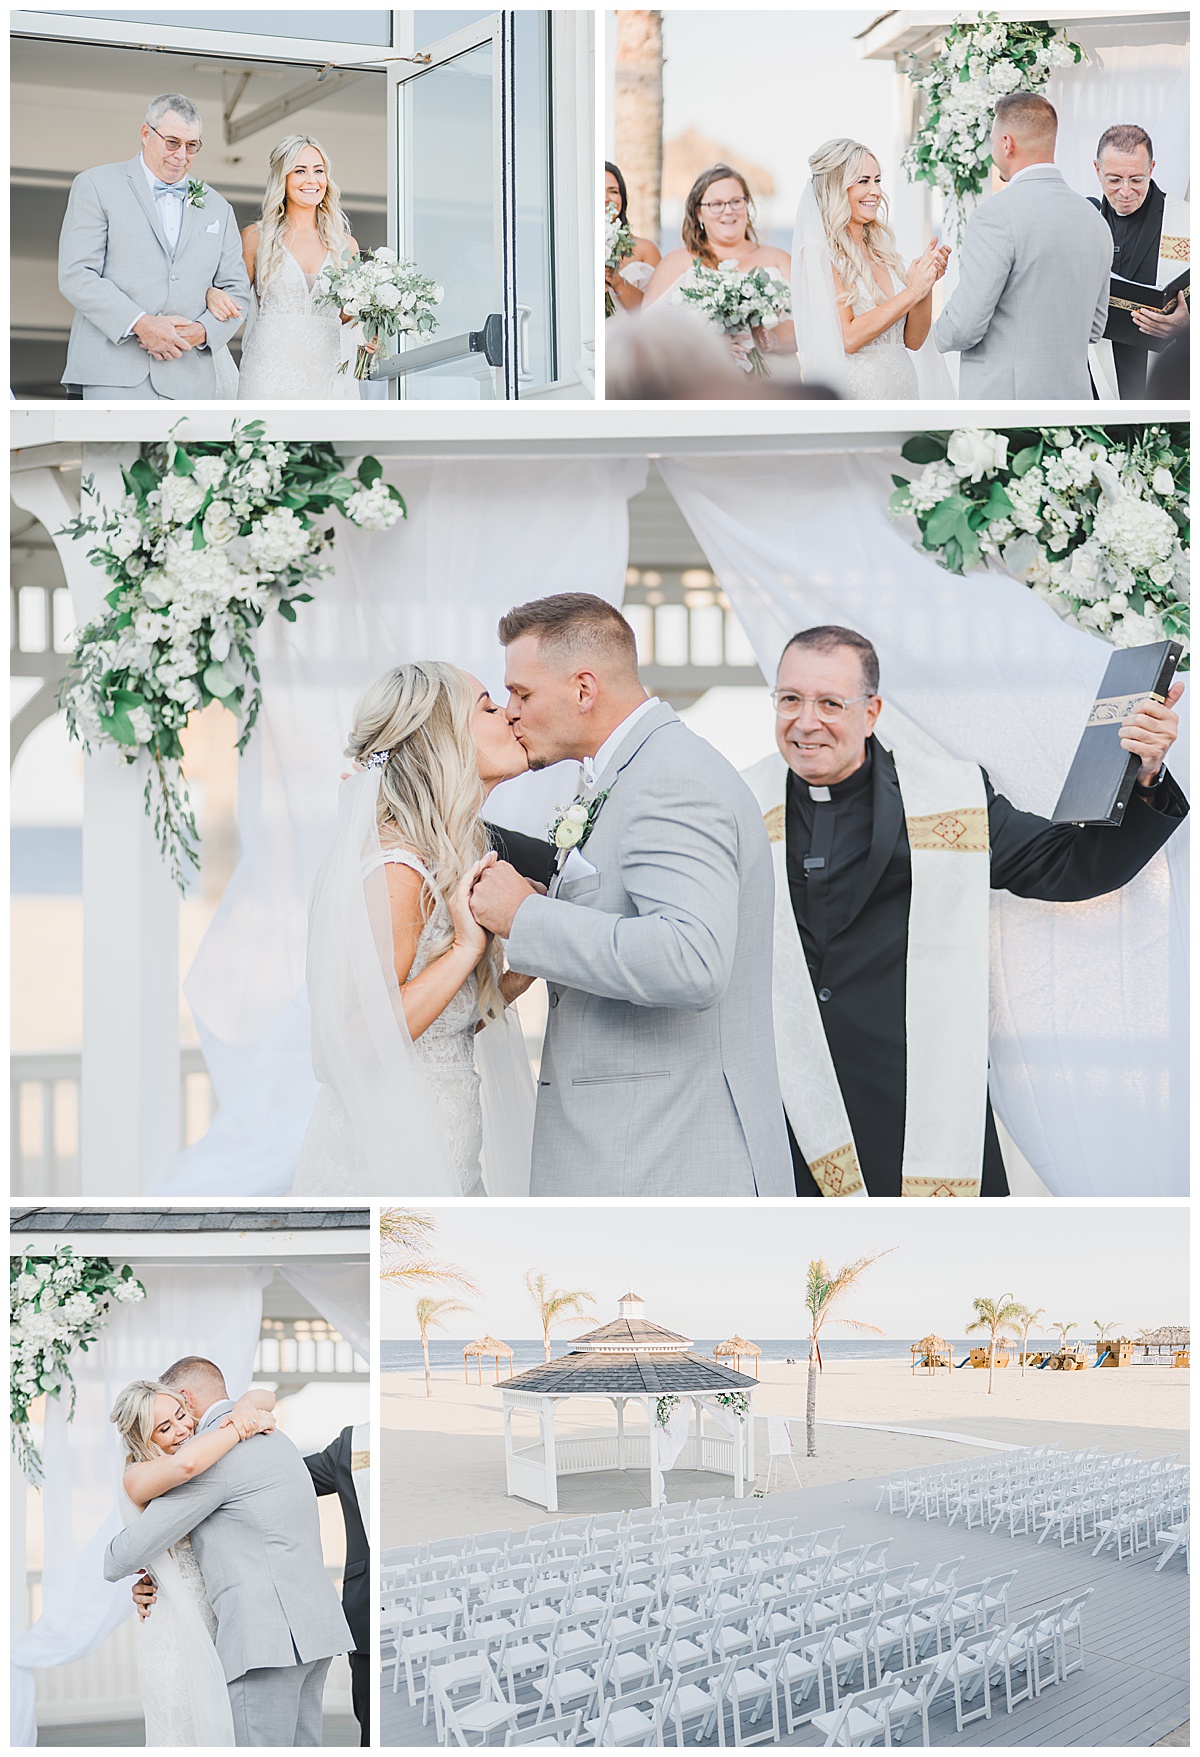 Windows on the water sea bright outdoor ceremony on beach 